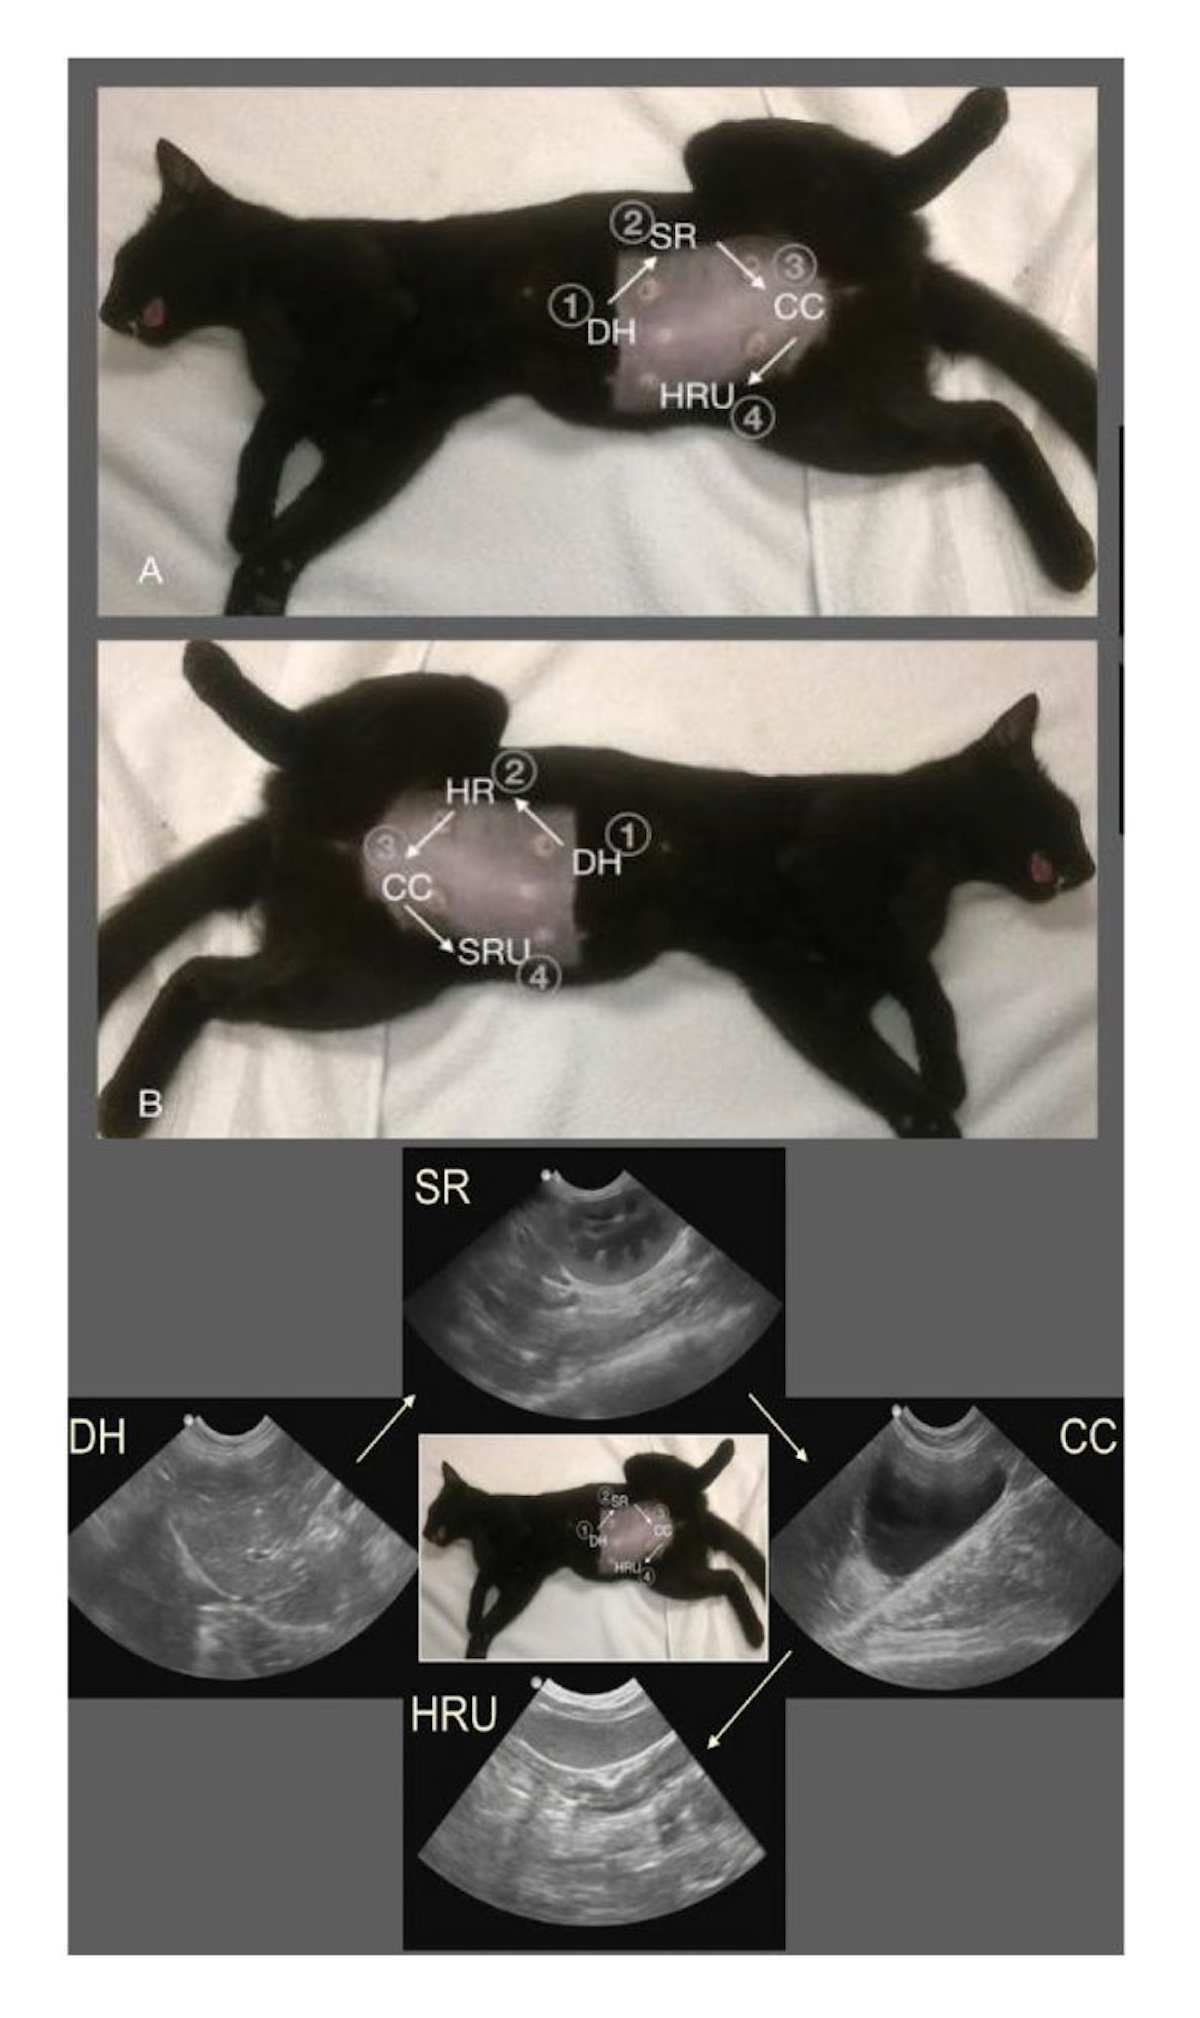 AFAST views on a cat in A) right and B) left lateral recumbency. The patient has been sedated in readiness for endotracheal intubation for an elective ovariohysterectomy. The cat would generally be conscious and the abdomen not shaved, but this helps better illustrate the external landmarks for the respective AFAST views. Alternatively, imaging is often performed in the standing position, which has lower impact and is safer for the respiratory fragile, the hemodynamically questionable or unstable, and the stressed cat, as shown in Figure 1.